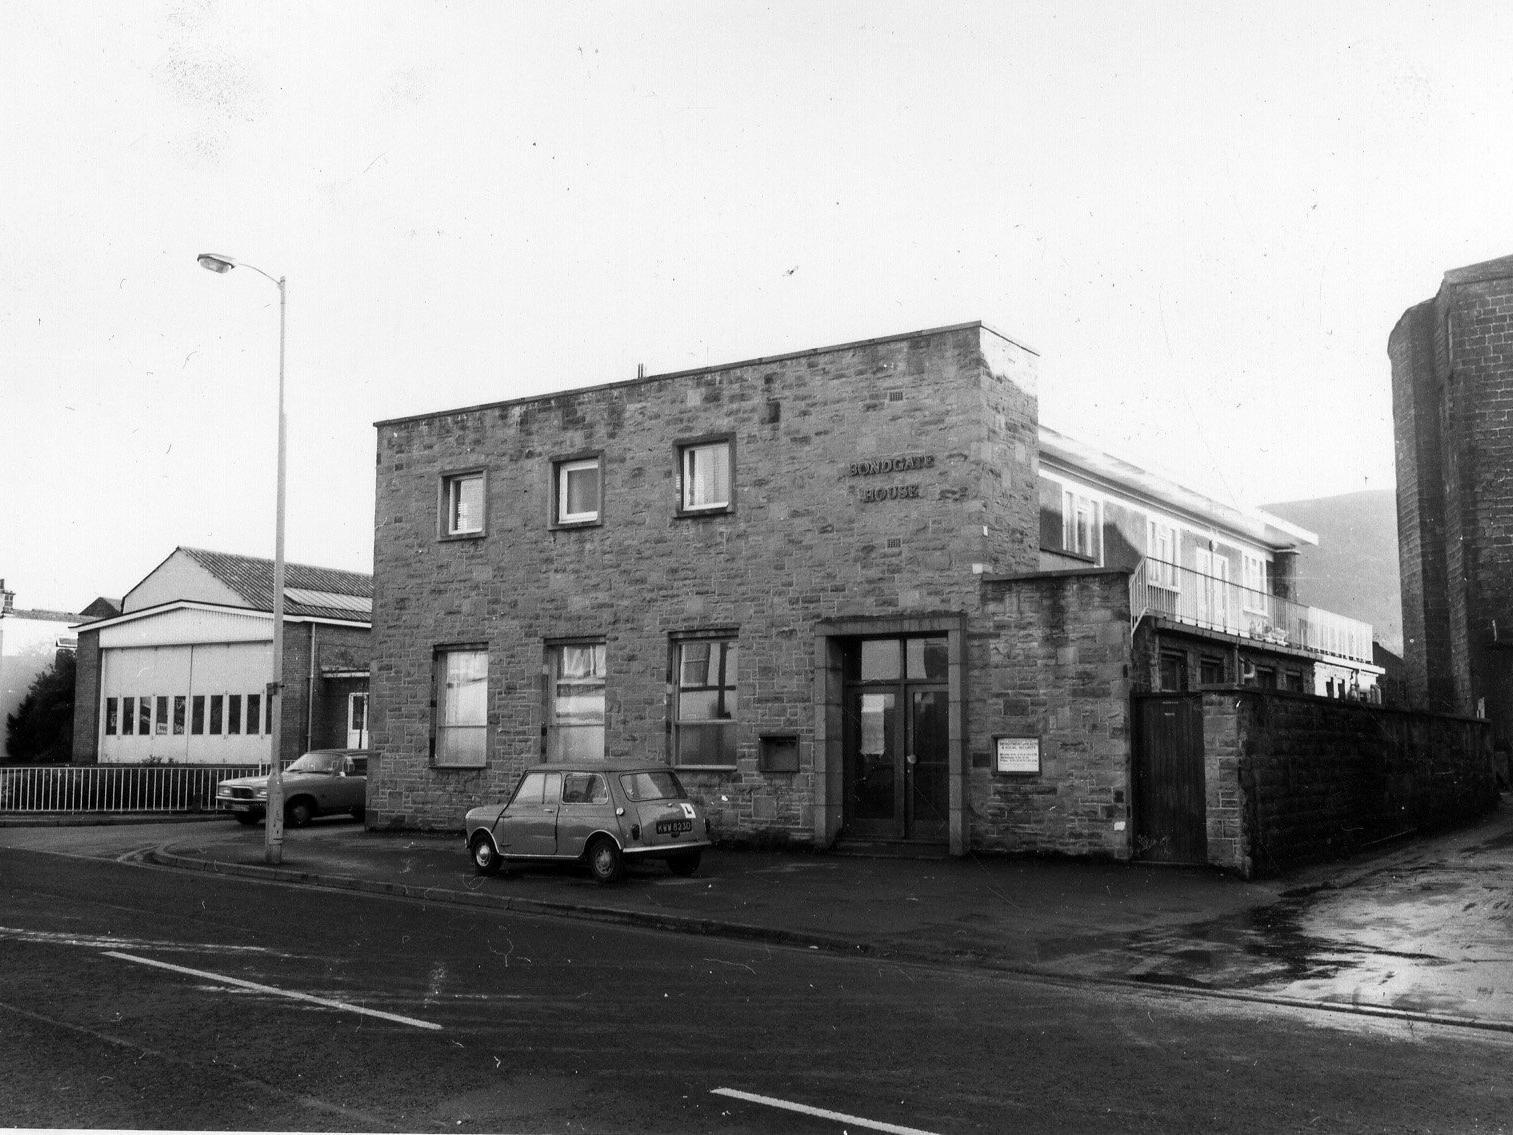 The south side of Bondgate showing Bondgate House, the premises of the Department of Health and Social Security in the mid-1970s.